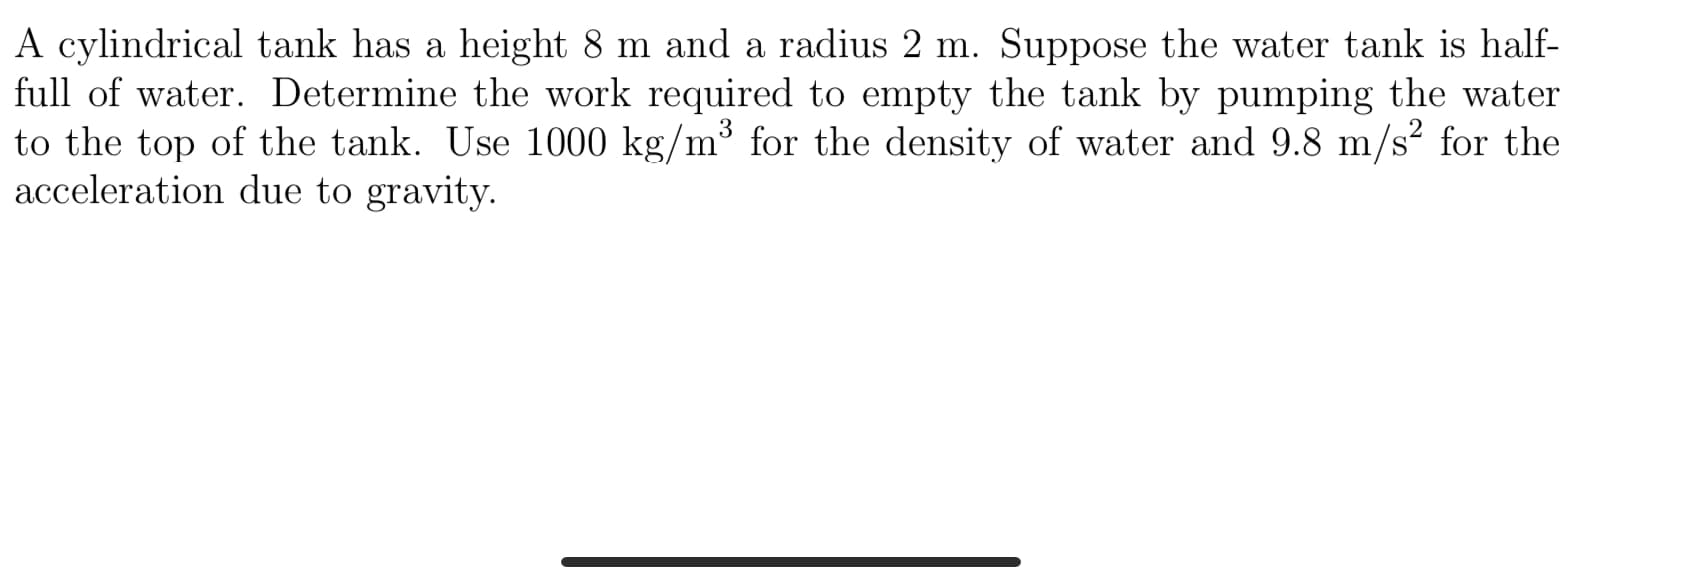 A cylindrical tank has a height 8 m and a radius 2 m. Suppose the water tank is half-
full of water. Determine the work required to empty the tank by pumping the water
to the top of the tank. Use 1000 kg/m³ for the density of water and 9.8 m/s² for the
acceleration due to gravity.
